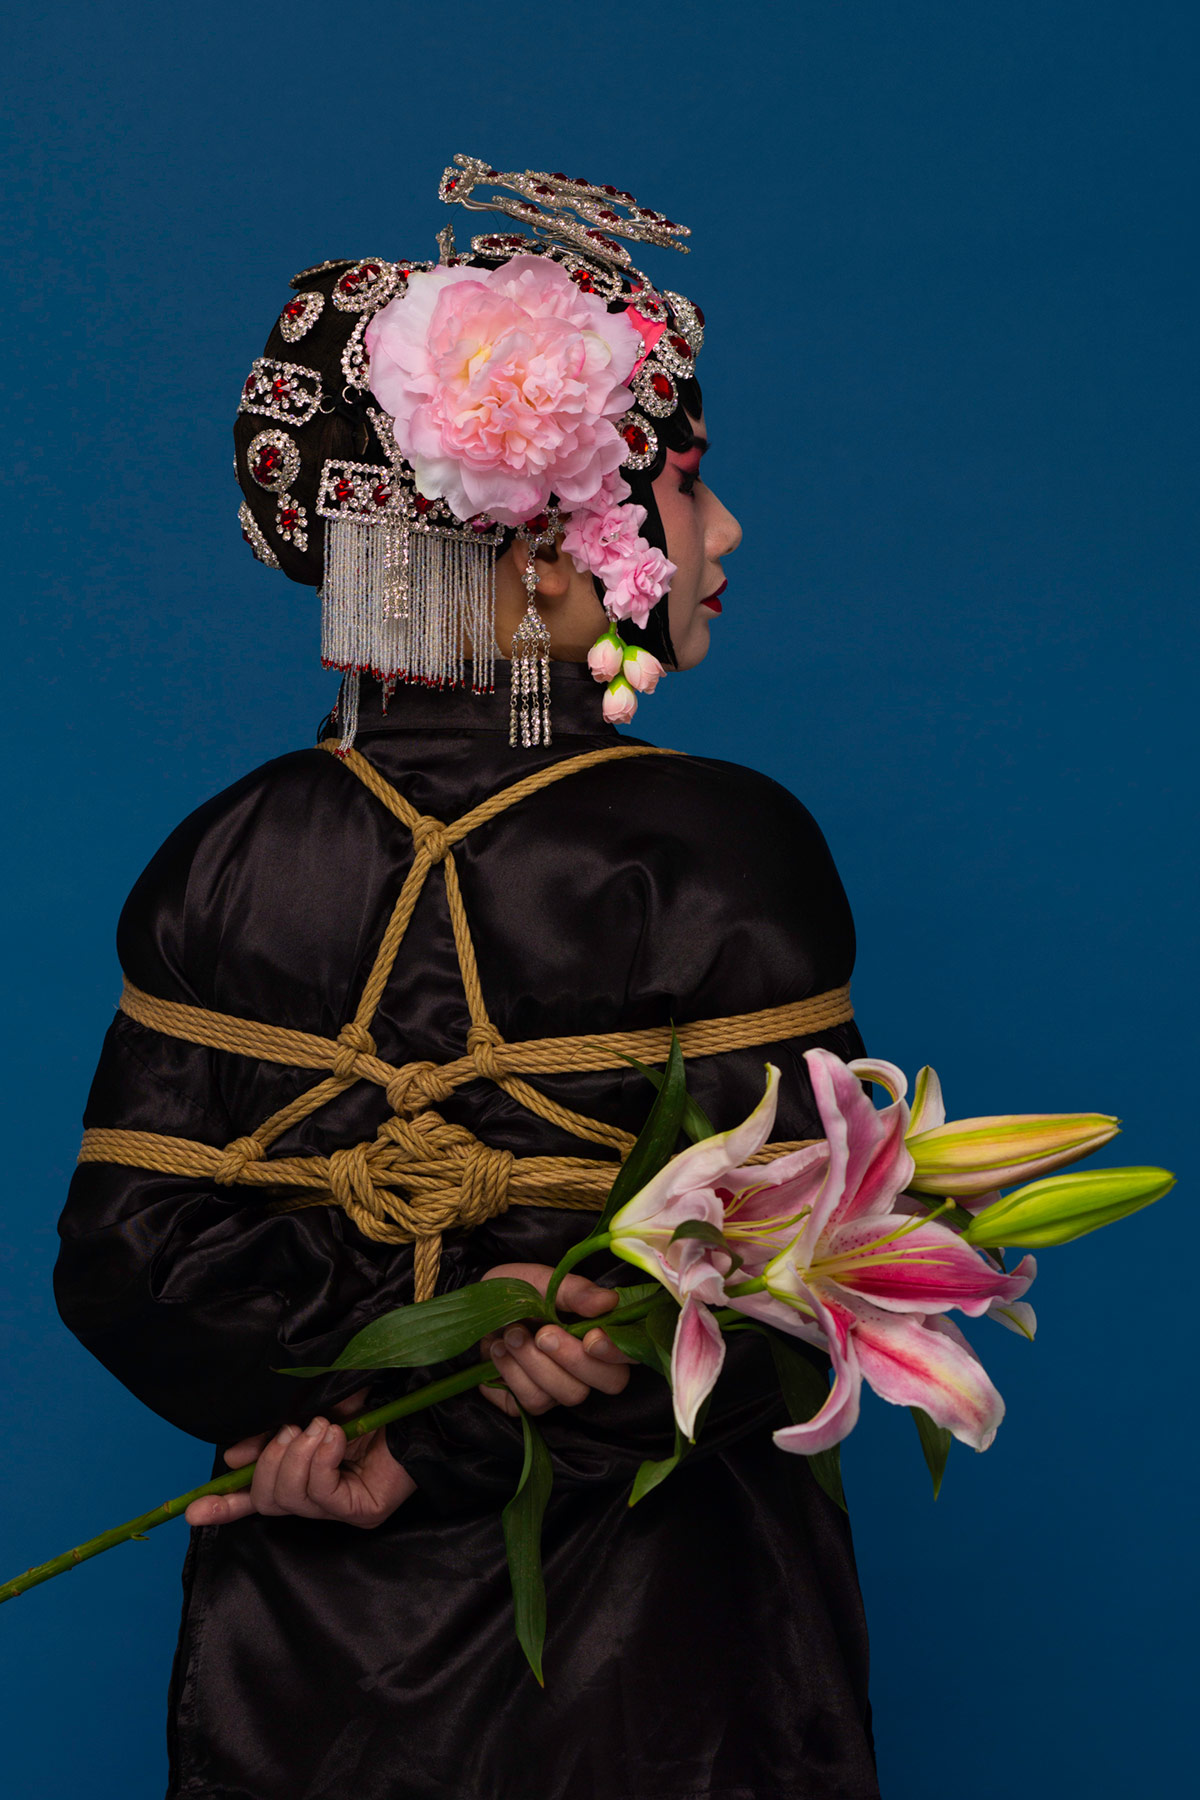 a girl wearing Beijing Opera costume with shaved head holding pink lily flower